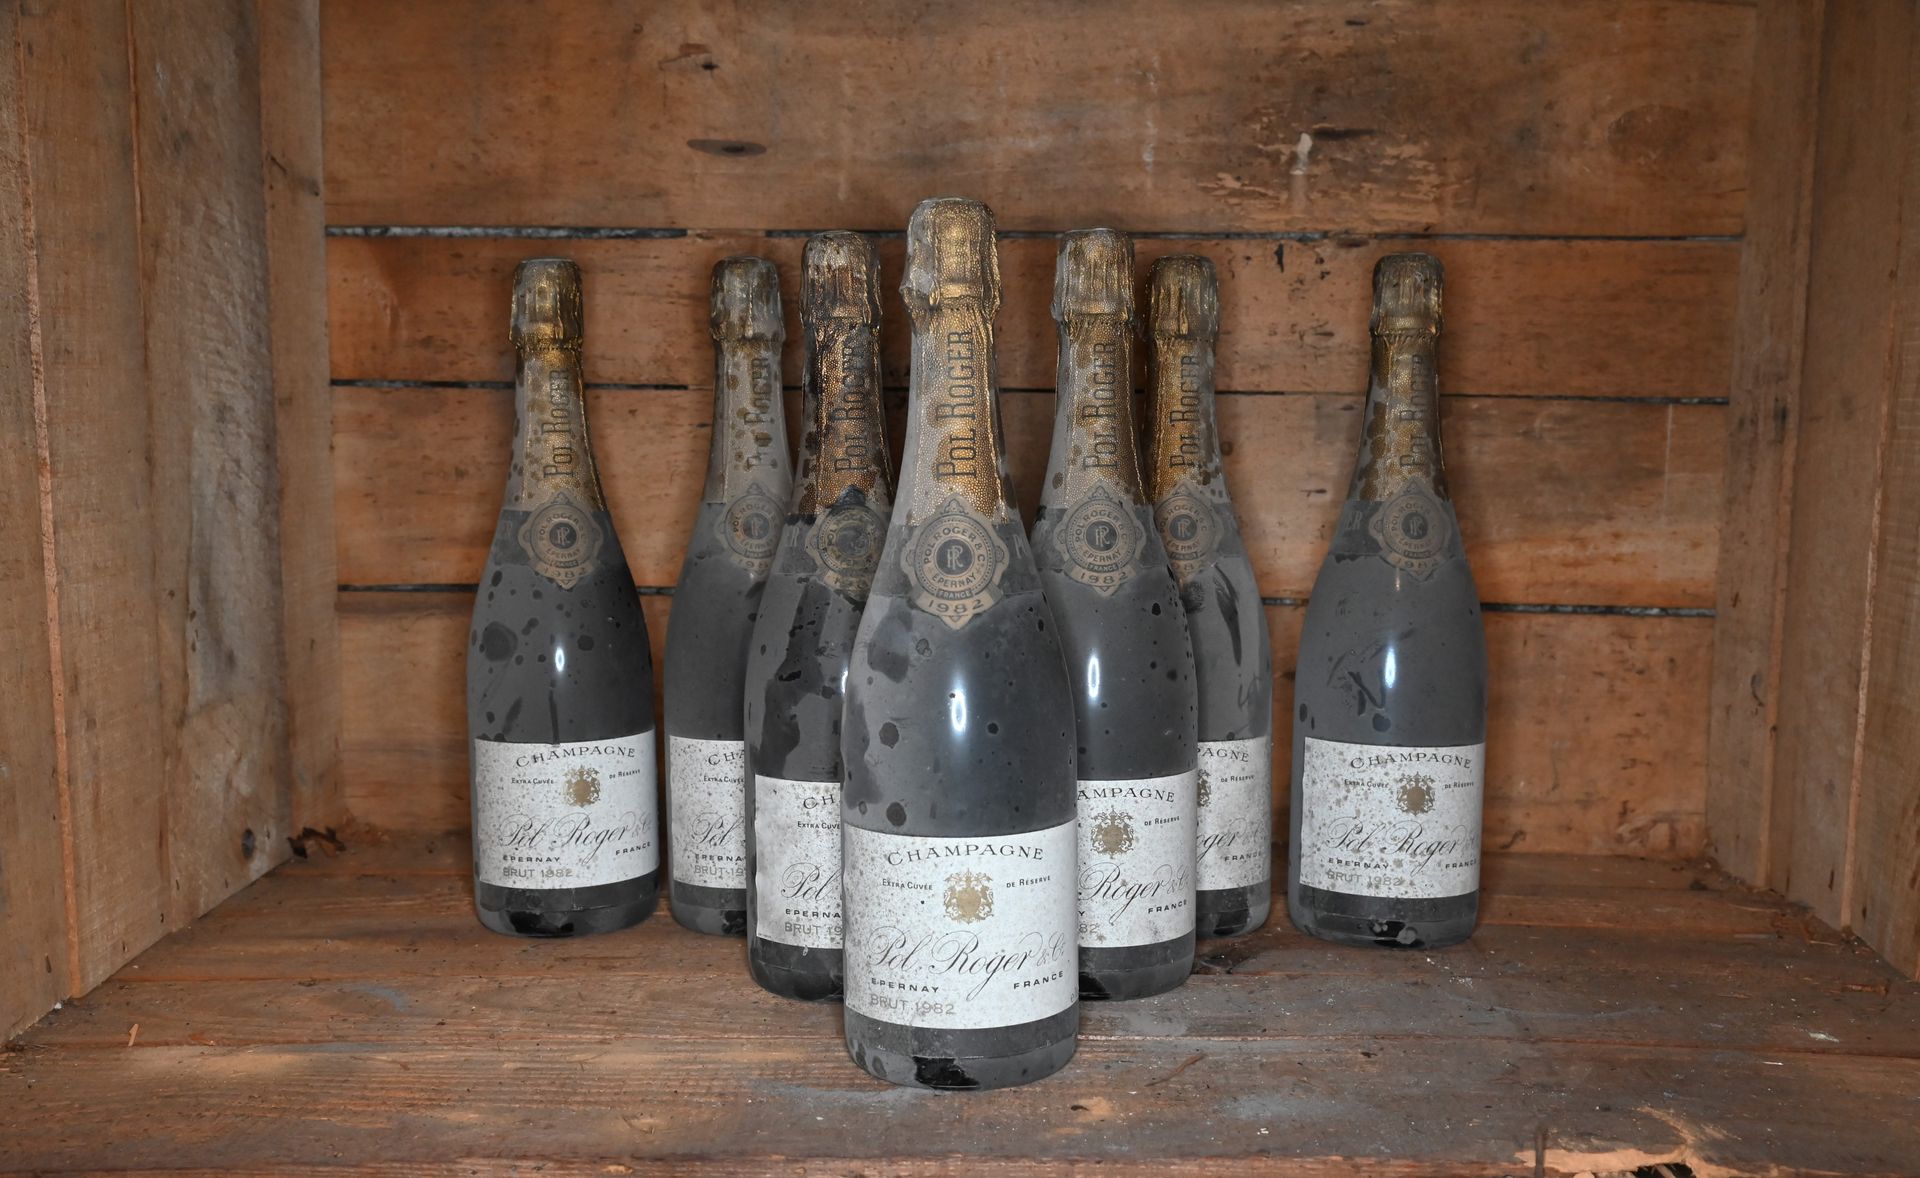 Null 8 bottles of Champagne Pol Roger Brut 1982

The condition of the labels, co&hellip;